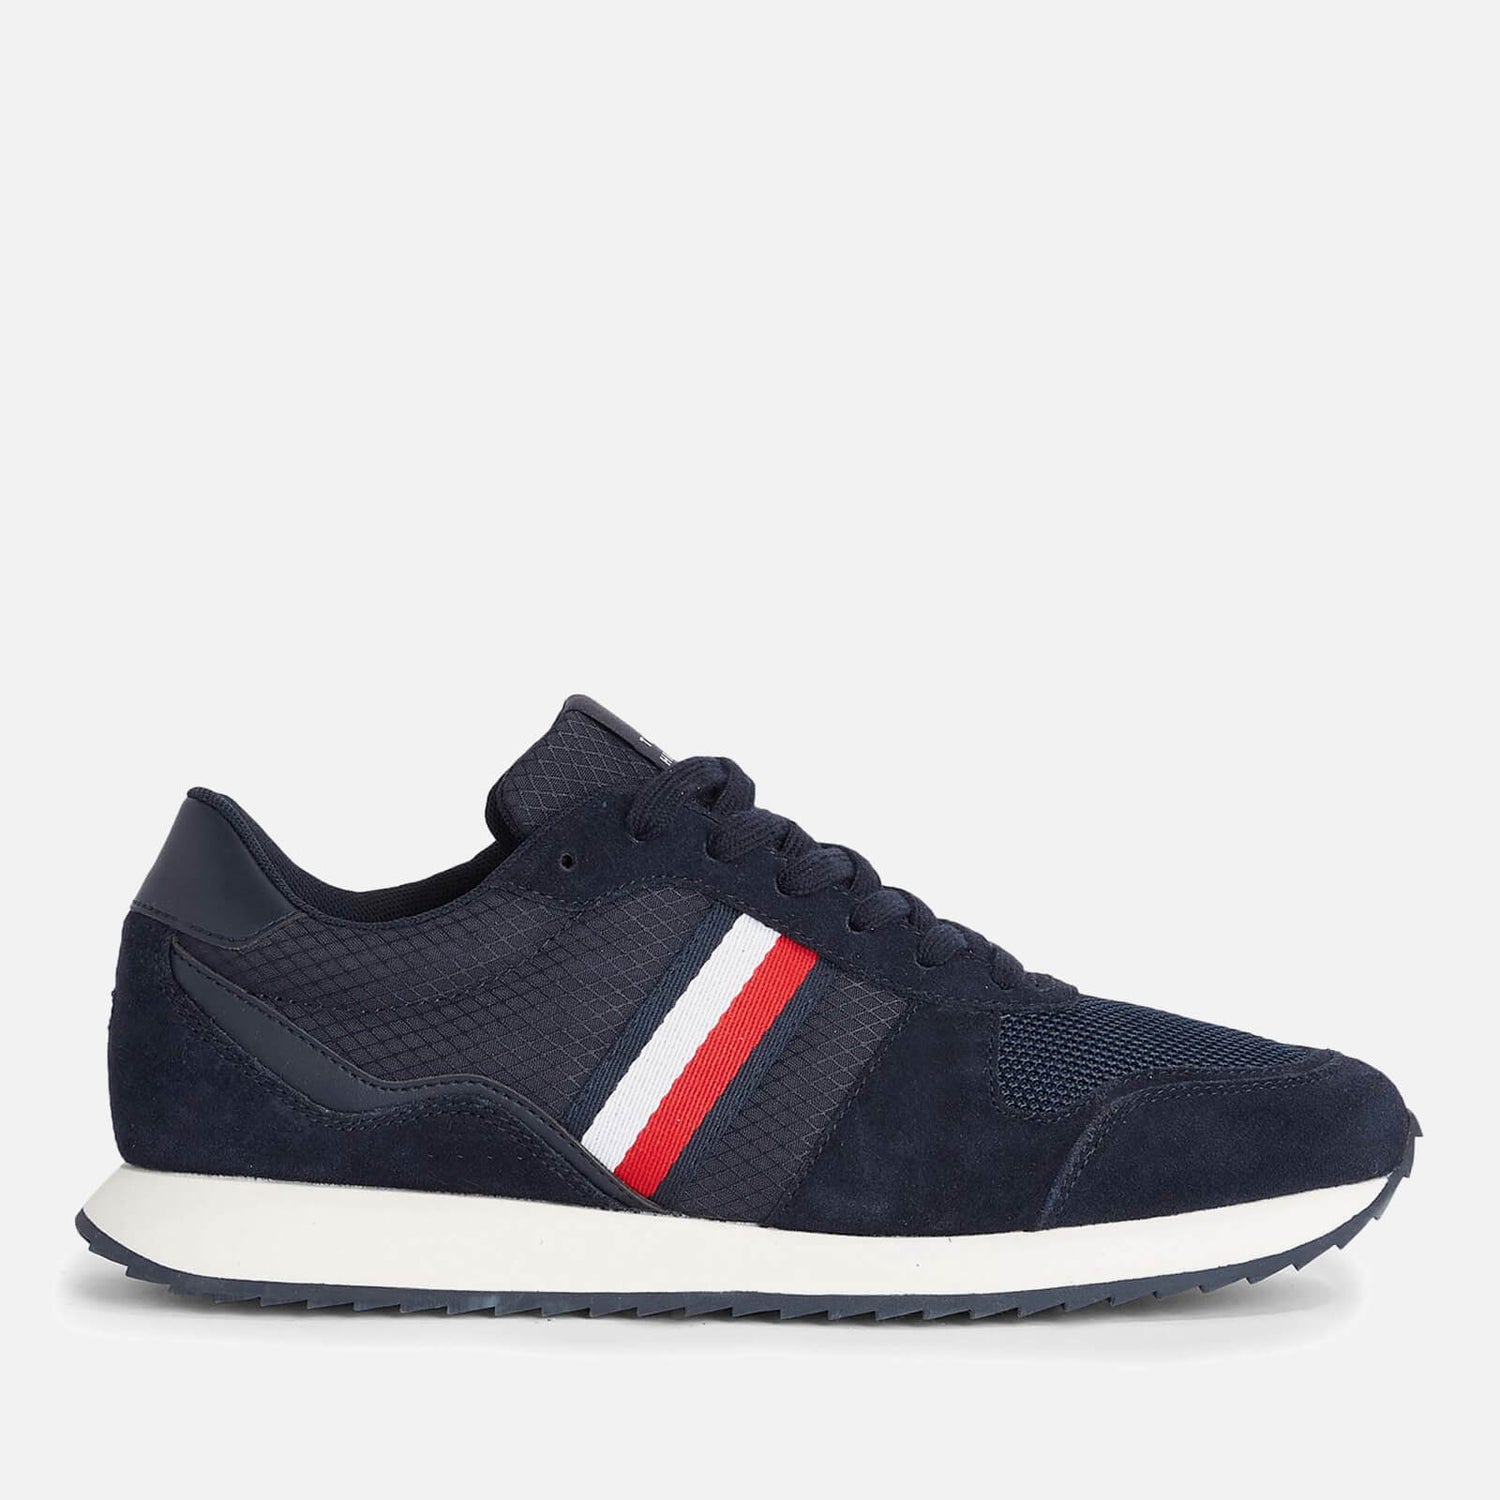 Tommy Hilfiger Men's Evo Mix Suede and Ripstop Trainers